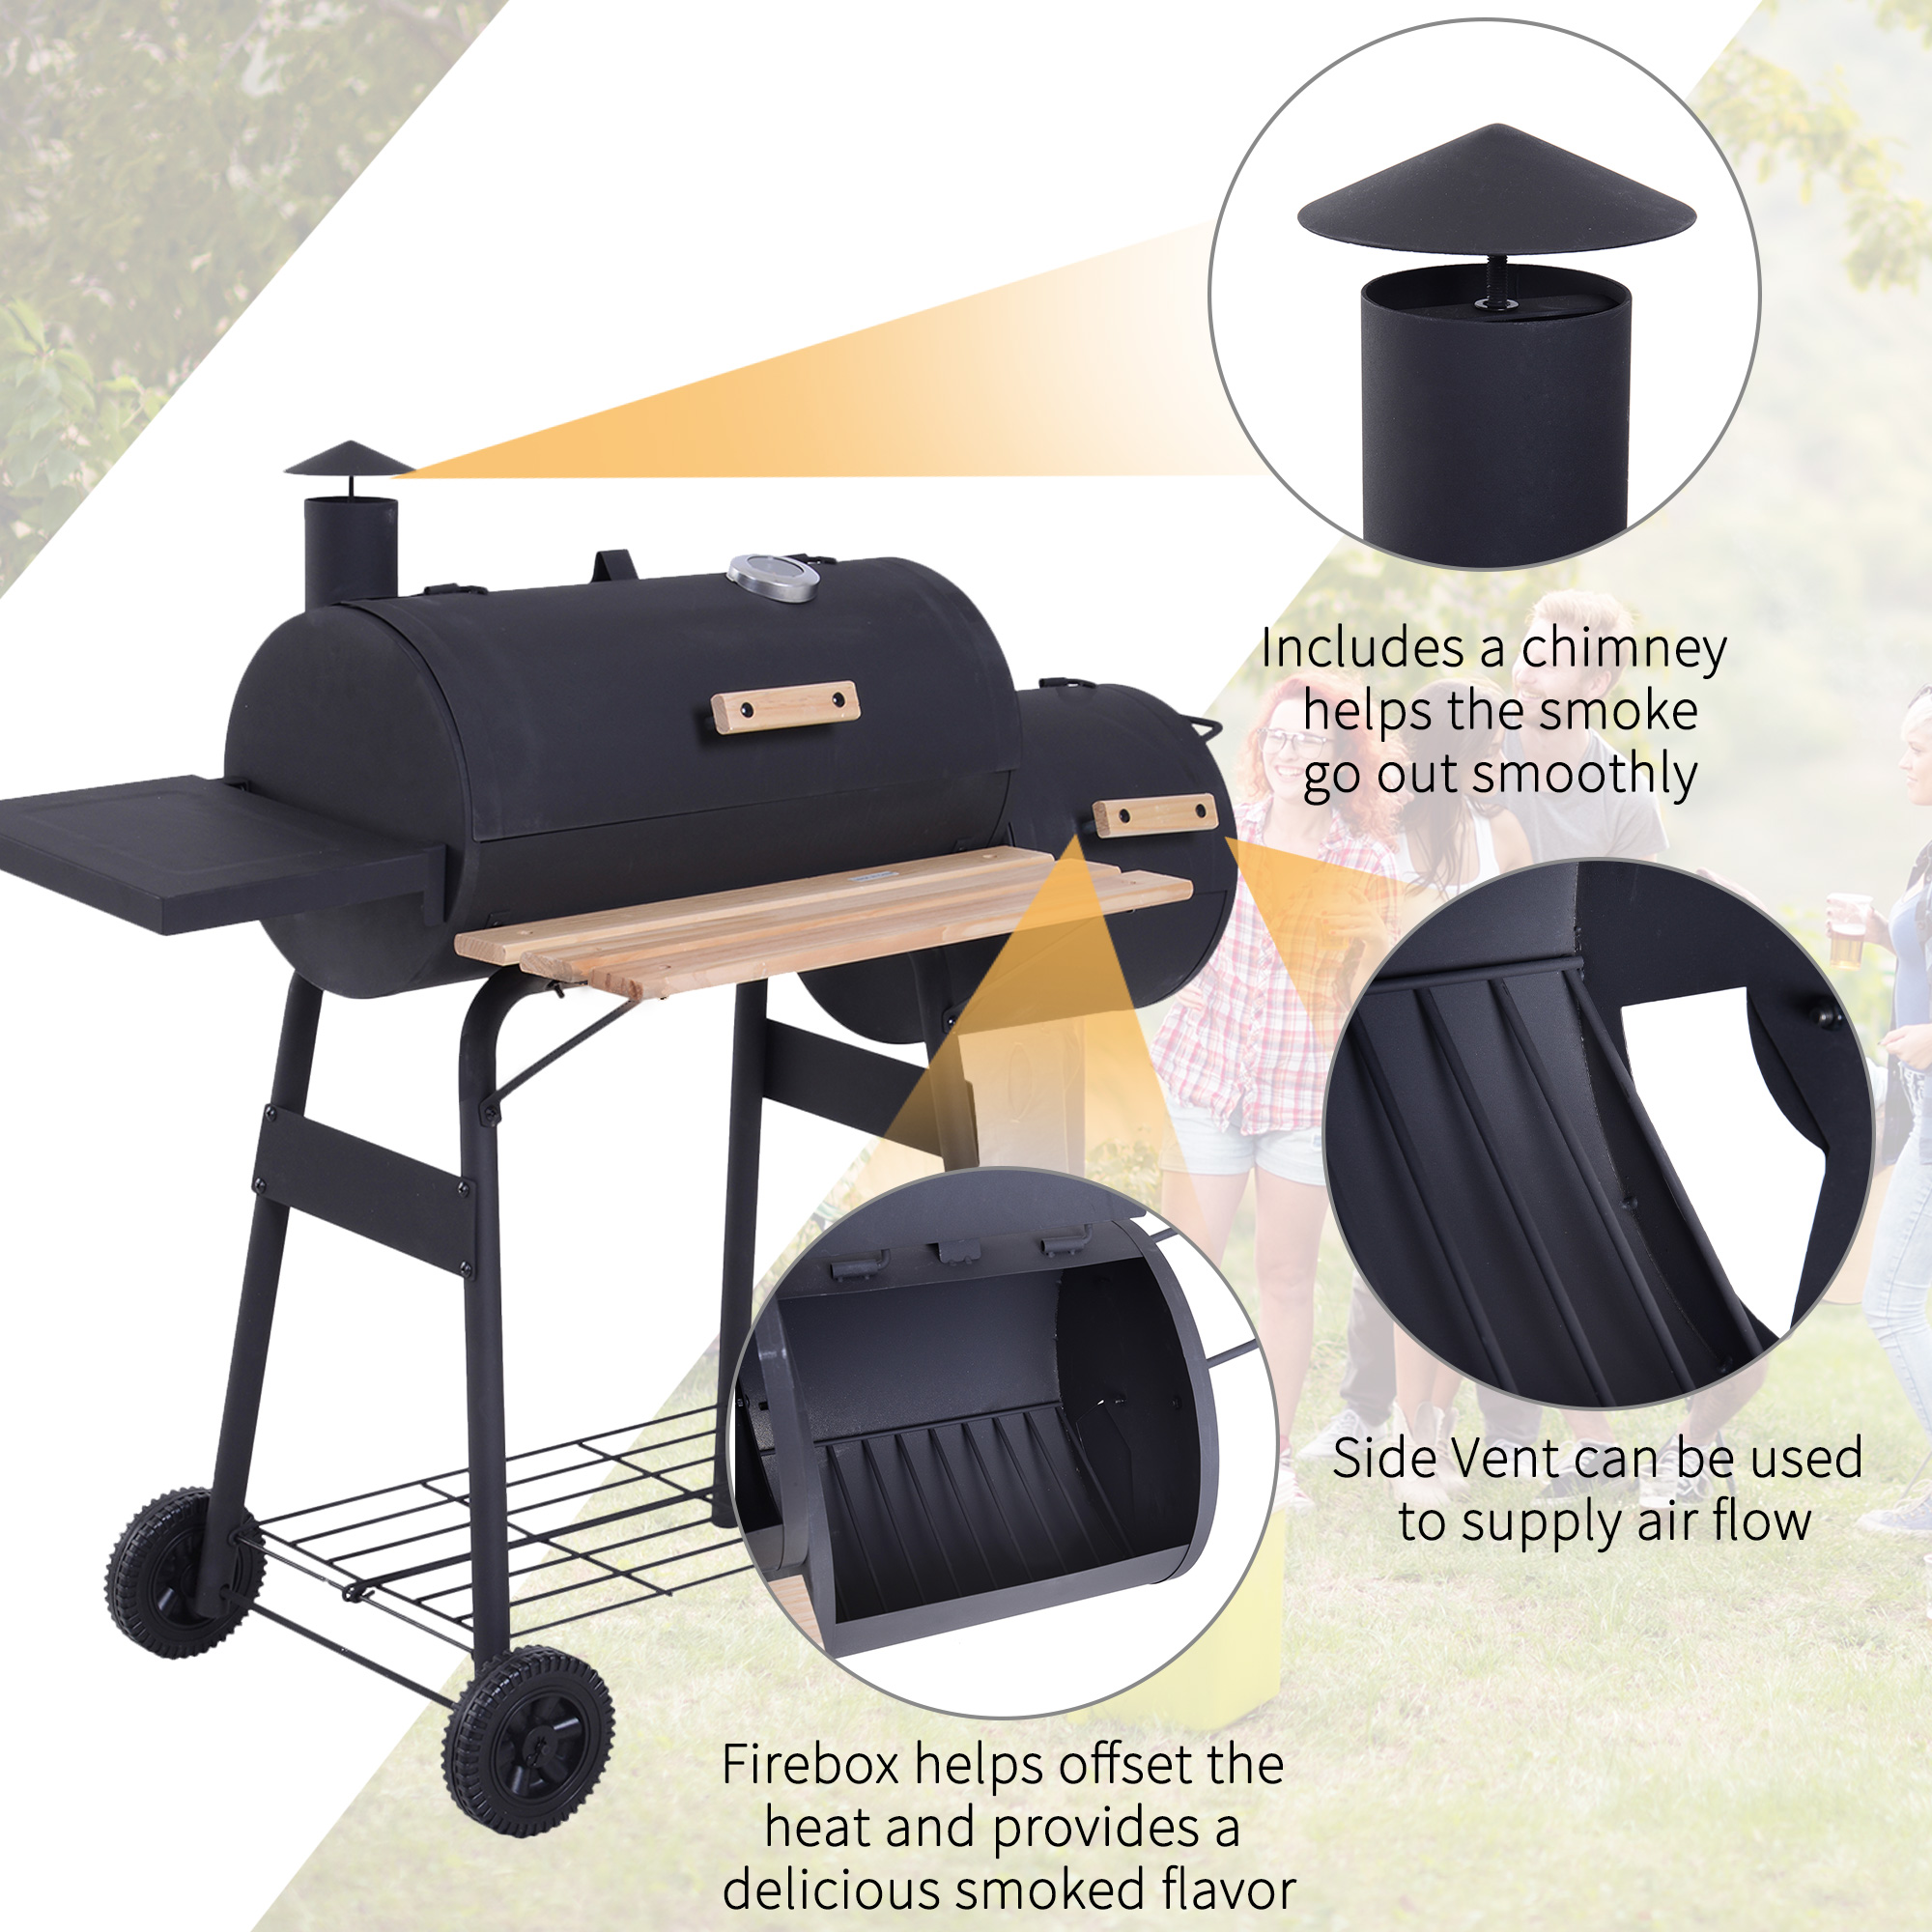 Outsunny 48" Steel Portable Backyard Charcoal BBQ Grill and Offset Smoker Combo - image 5 of 9